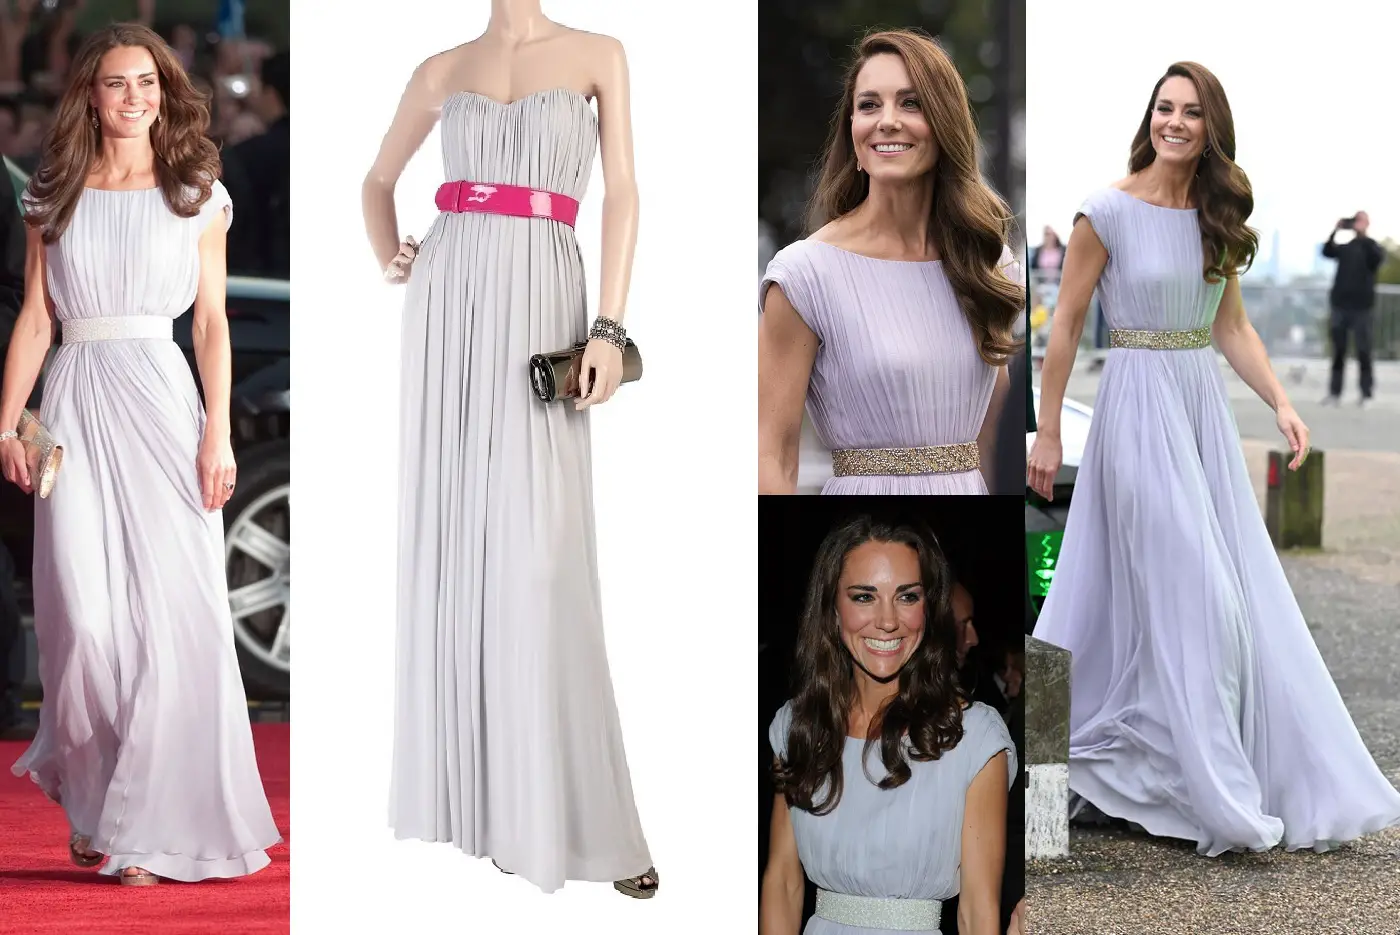 The Duchess of Cambridge wore Alexander McQueen Lilac Gown